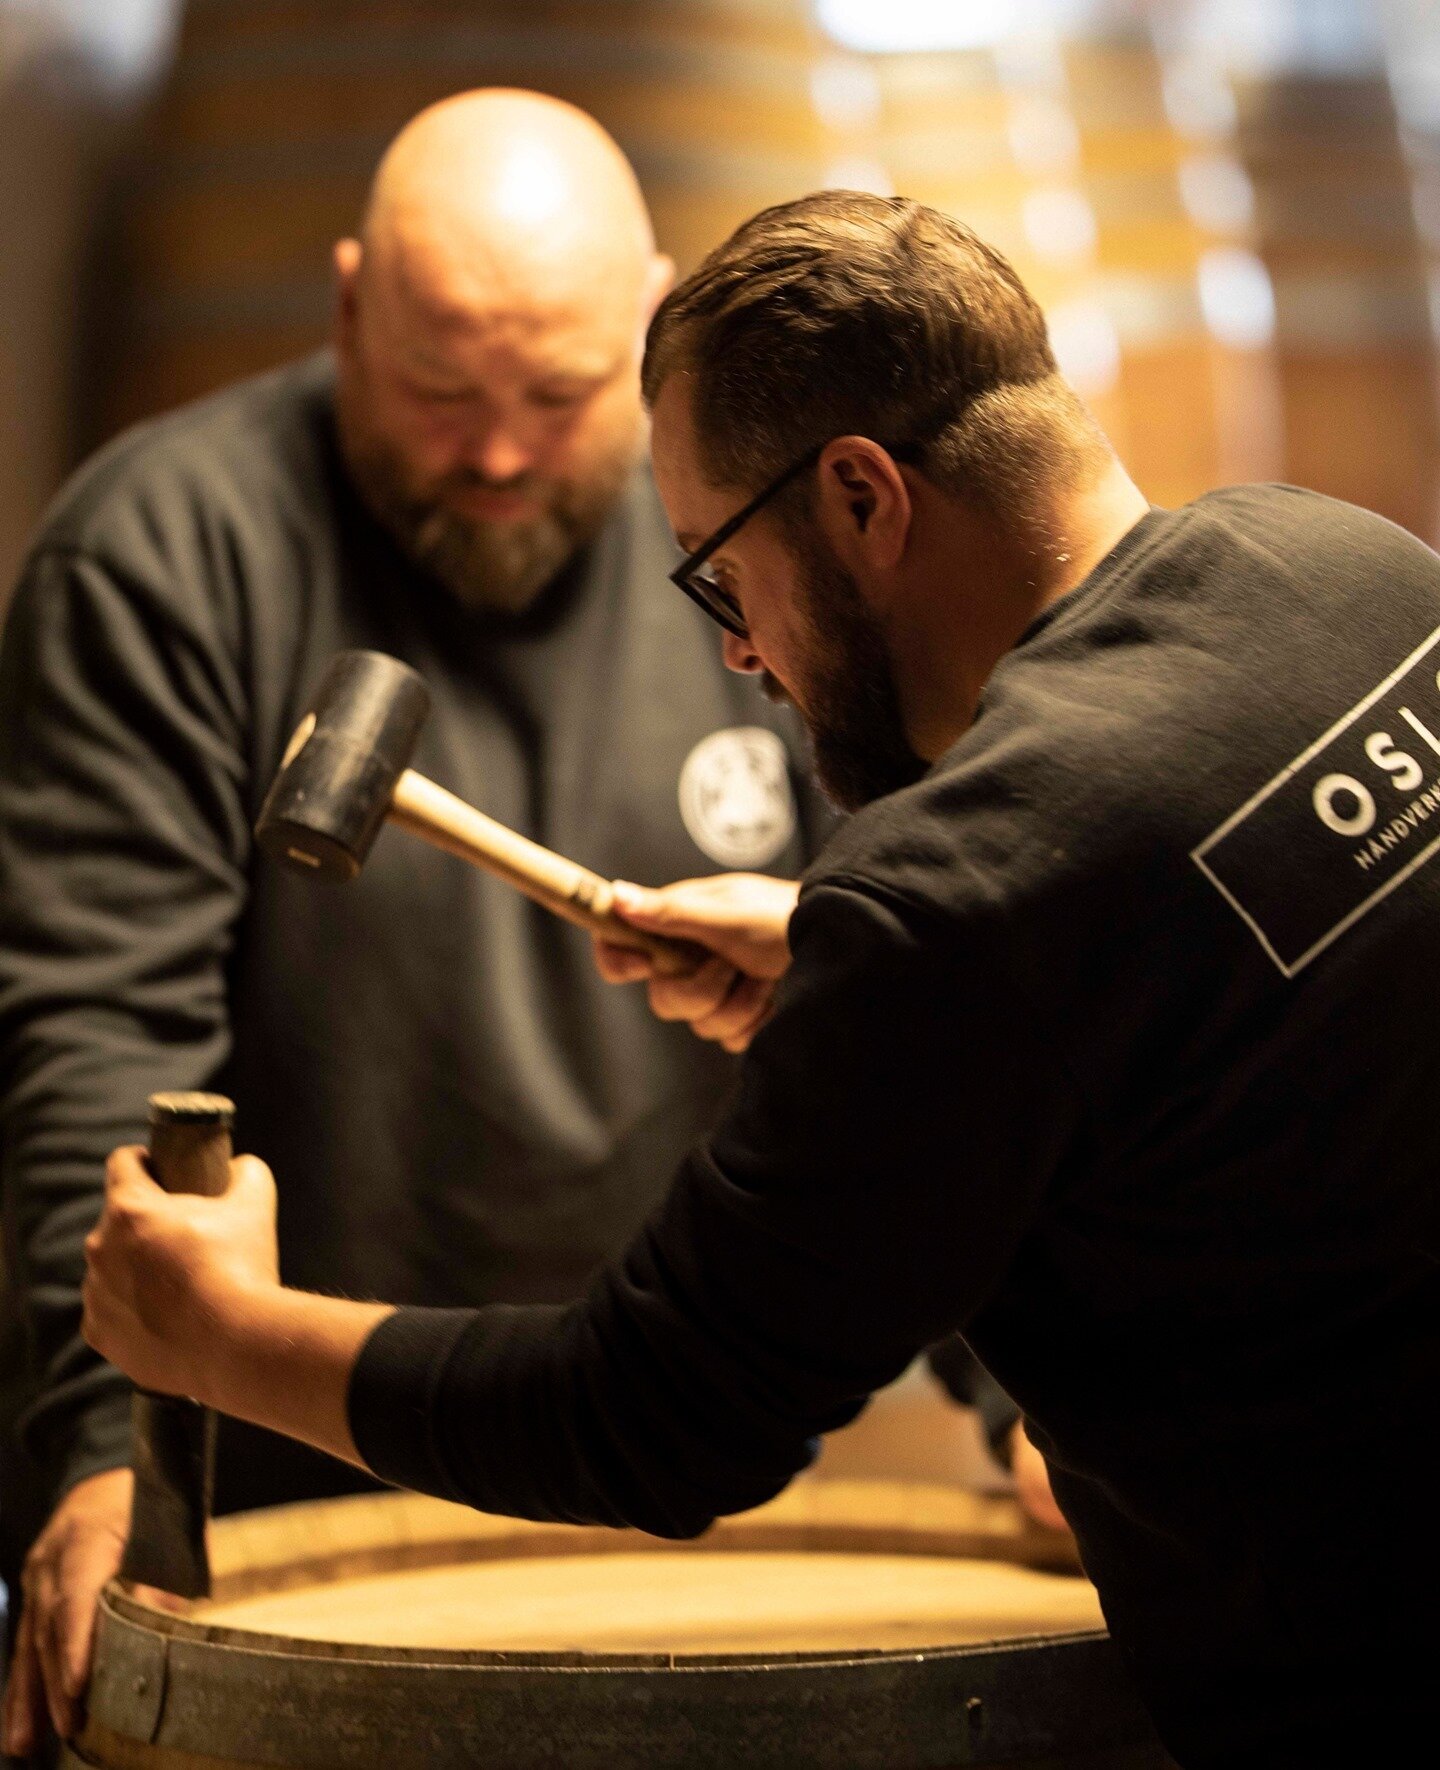 We use a wide range of barrels for our spirits. Most of them are experimental and unusual for the category. We have also swapped barrels with some of the best of them. There are a lot to look forward to from our barrel storage. ⁠
⁠
⁠
⁠
⁠
#vidda #vidd